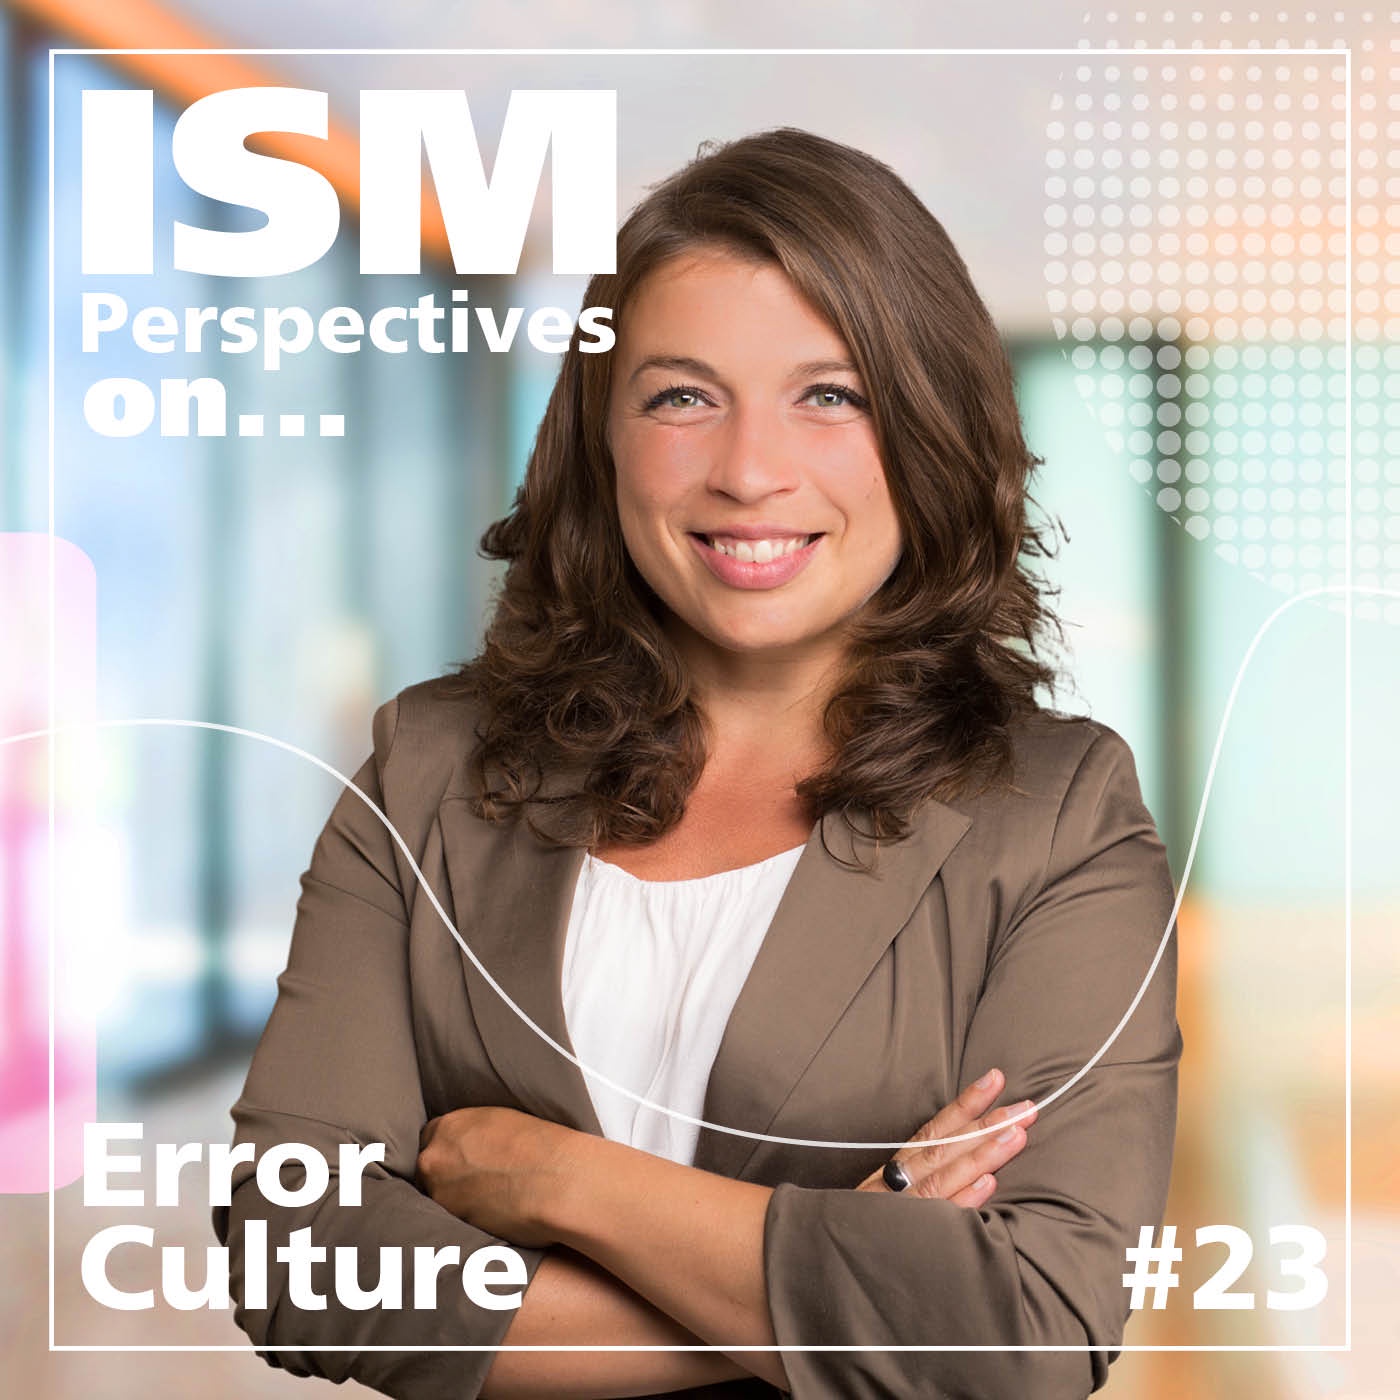 Perspectives on: Error Culture